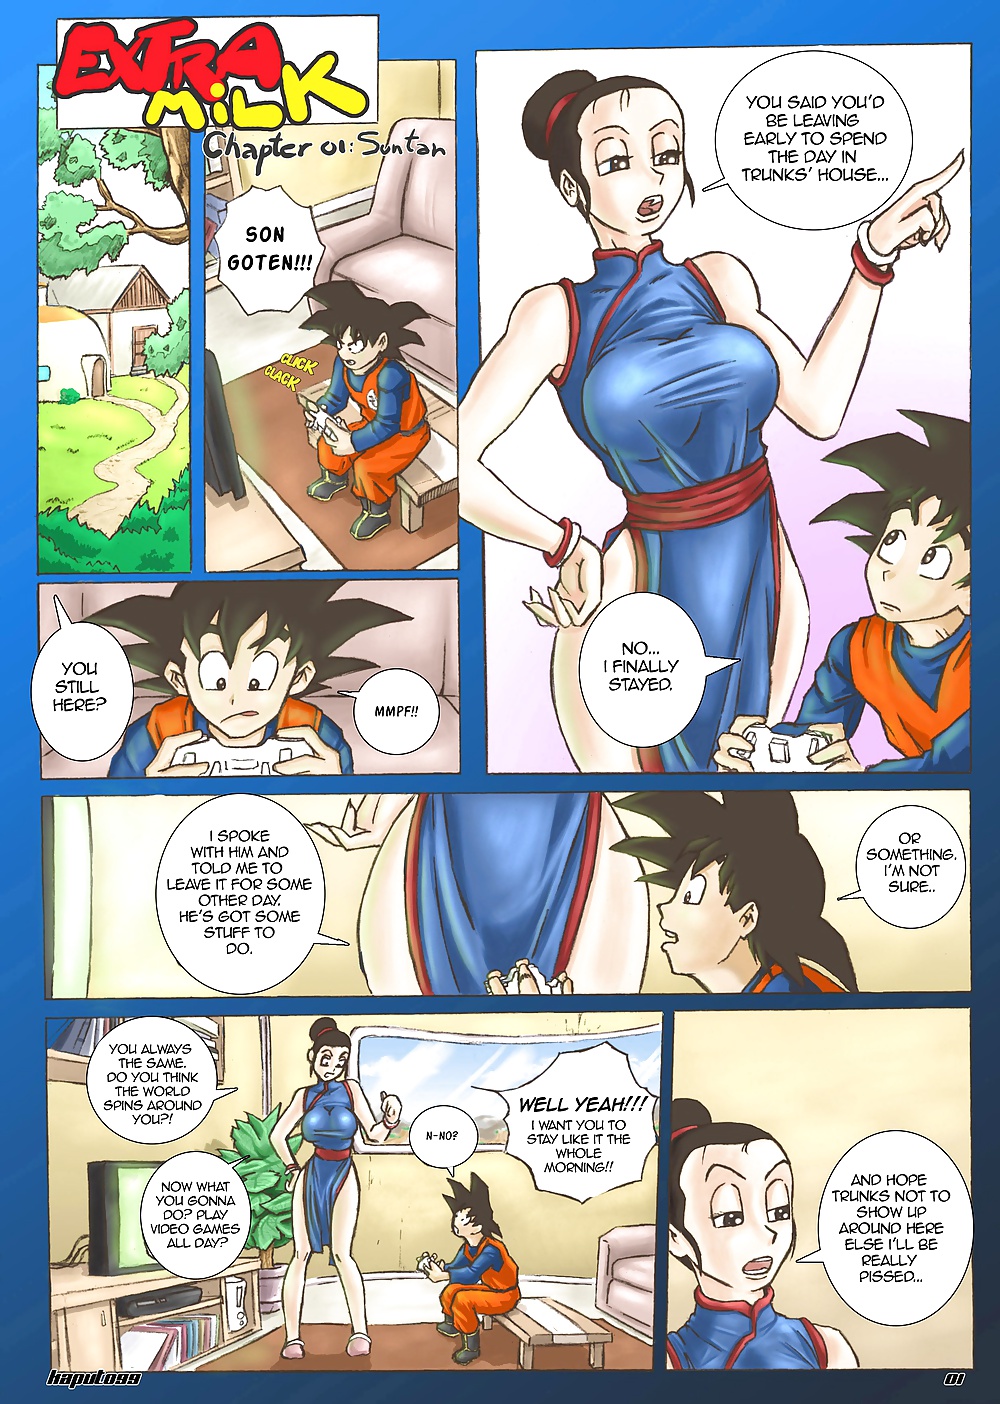 Dragon ball z - latte extra eng completo
 #25020042